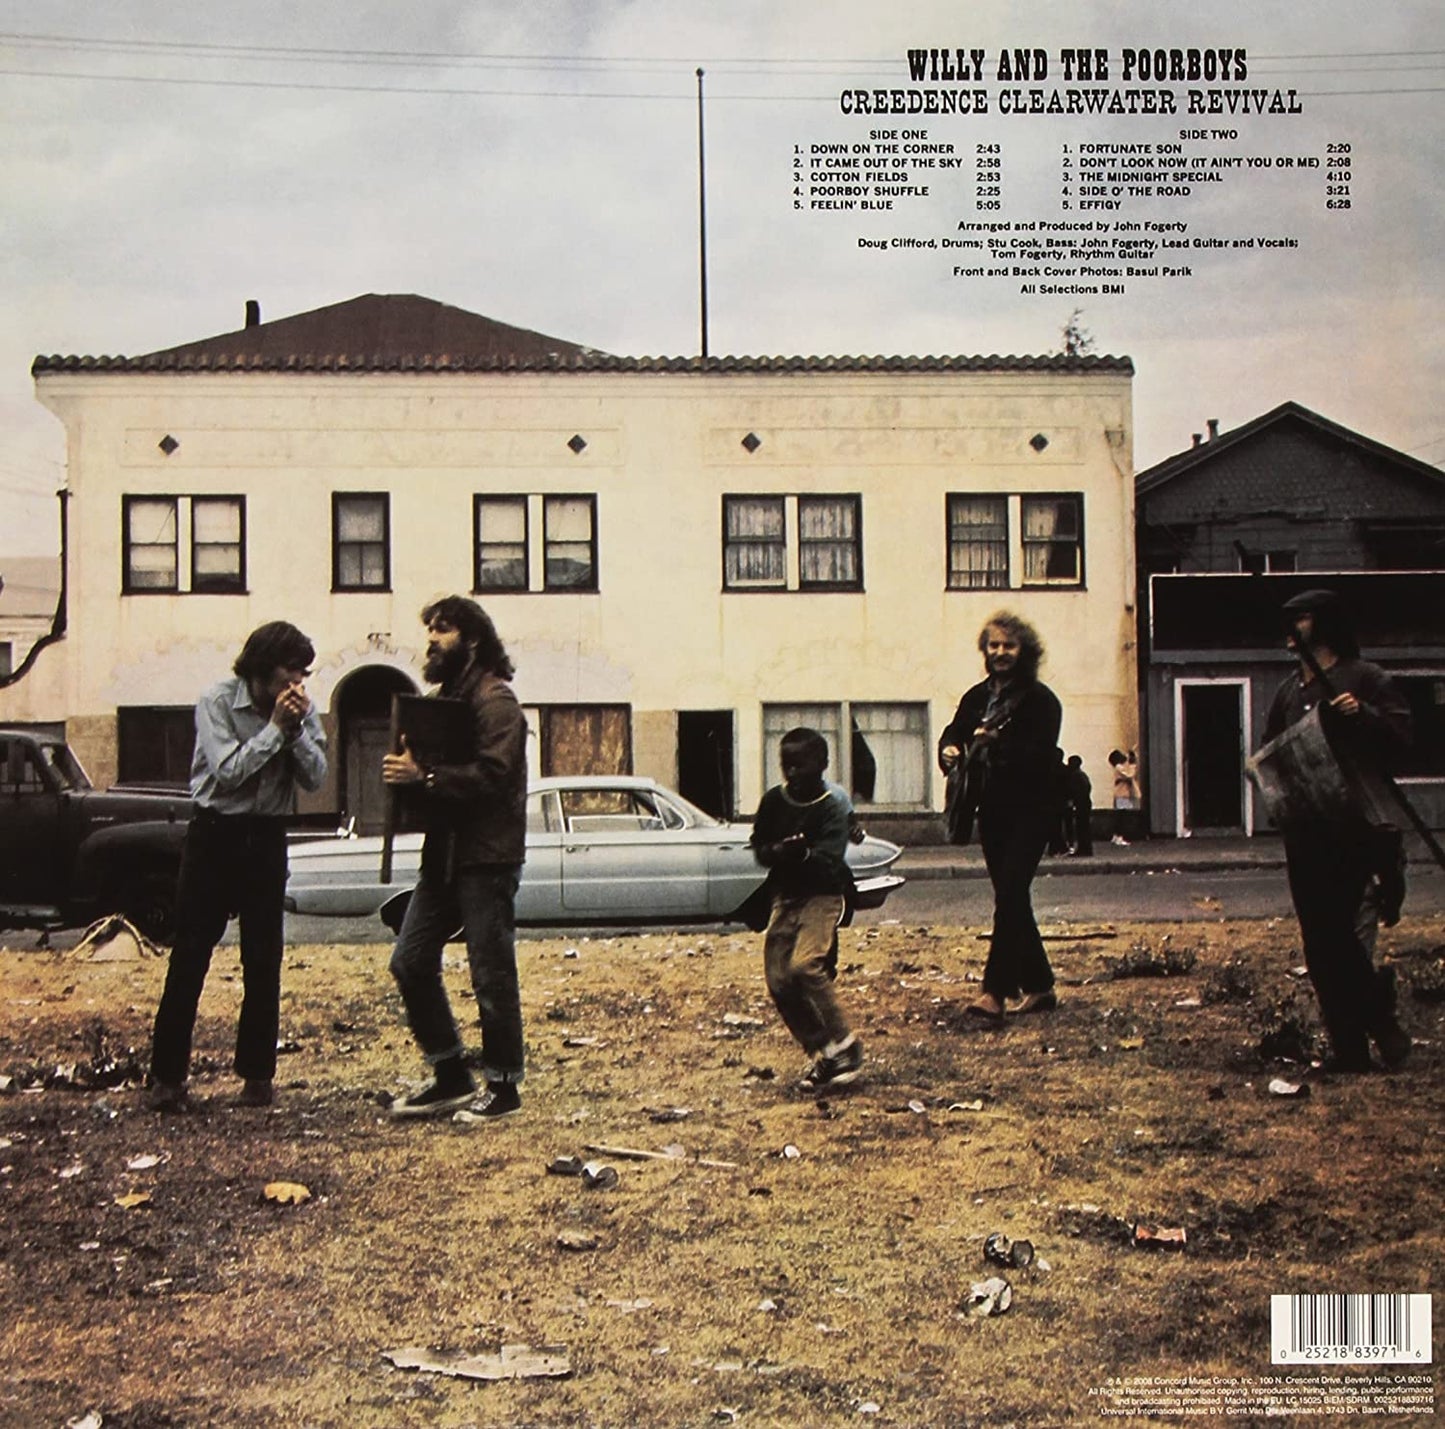 Creedence Clearwater Revival/Willy and the Poor Boys [LP]